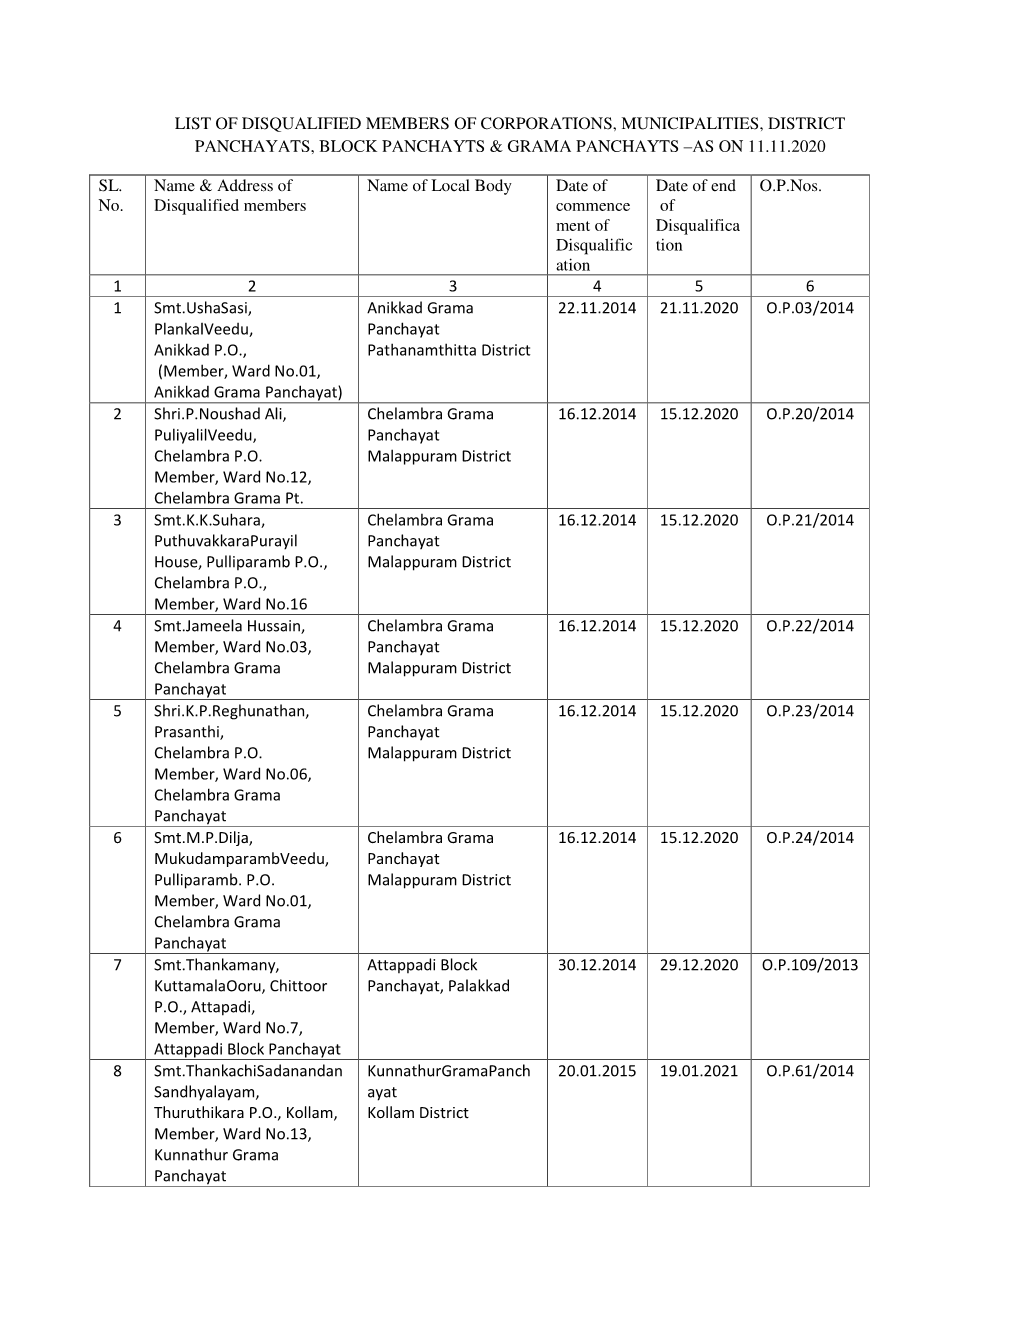 Members/Councilors Disqualified Under Kerala Local Authorities